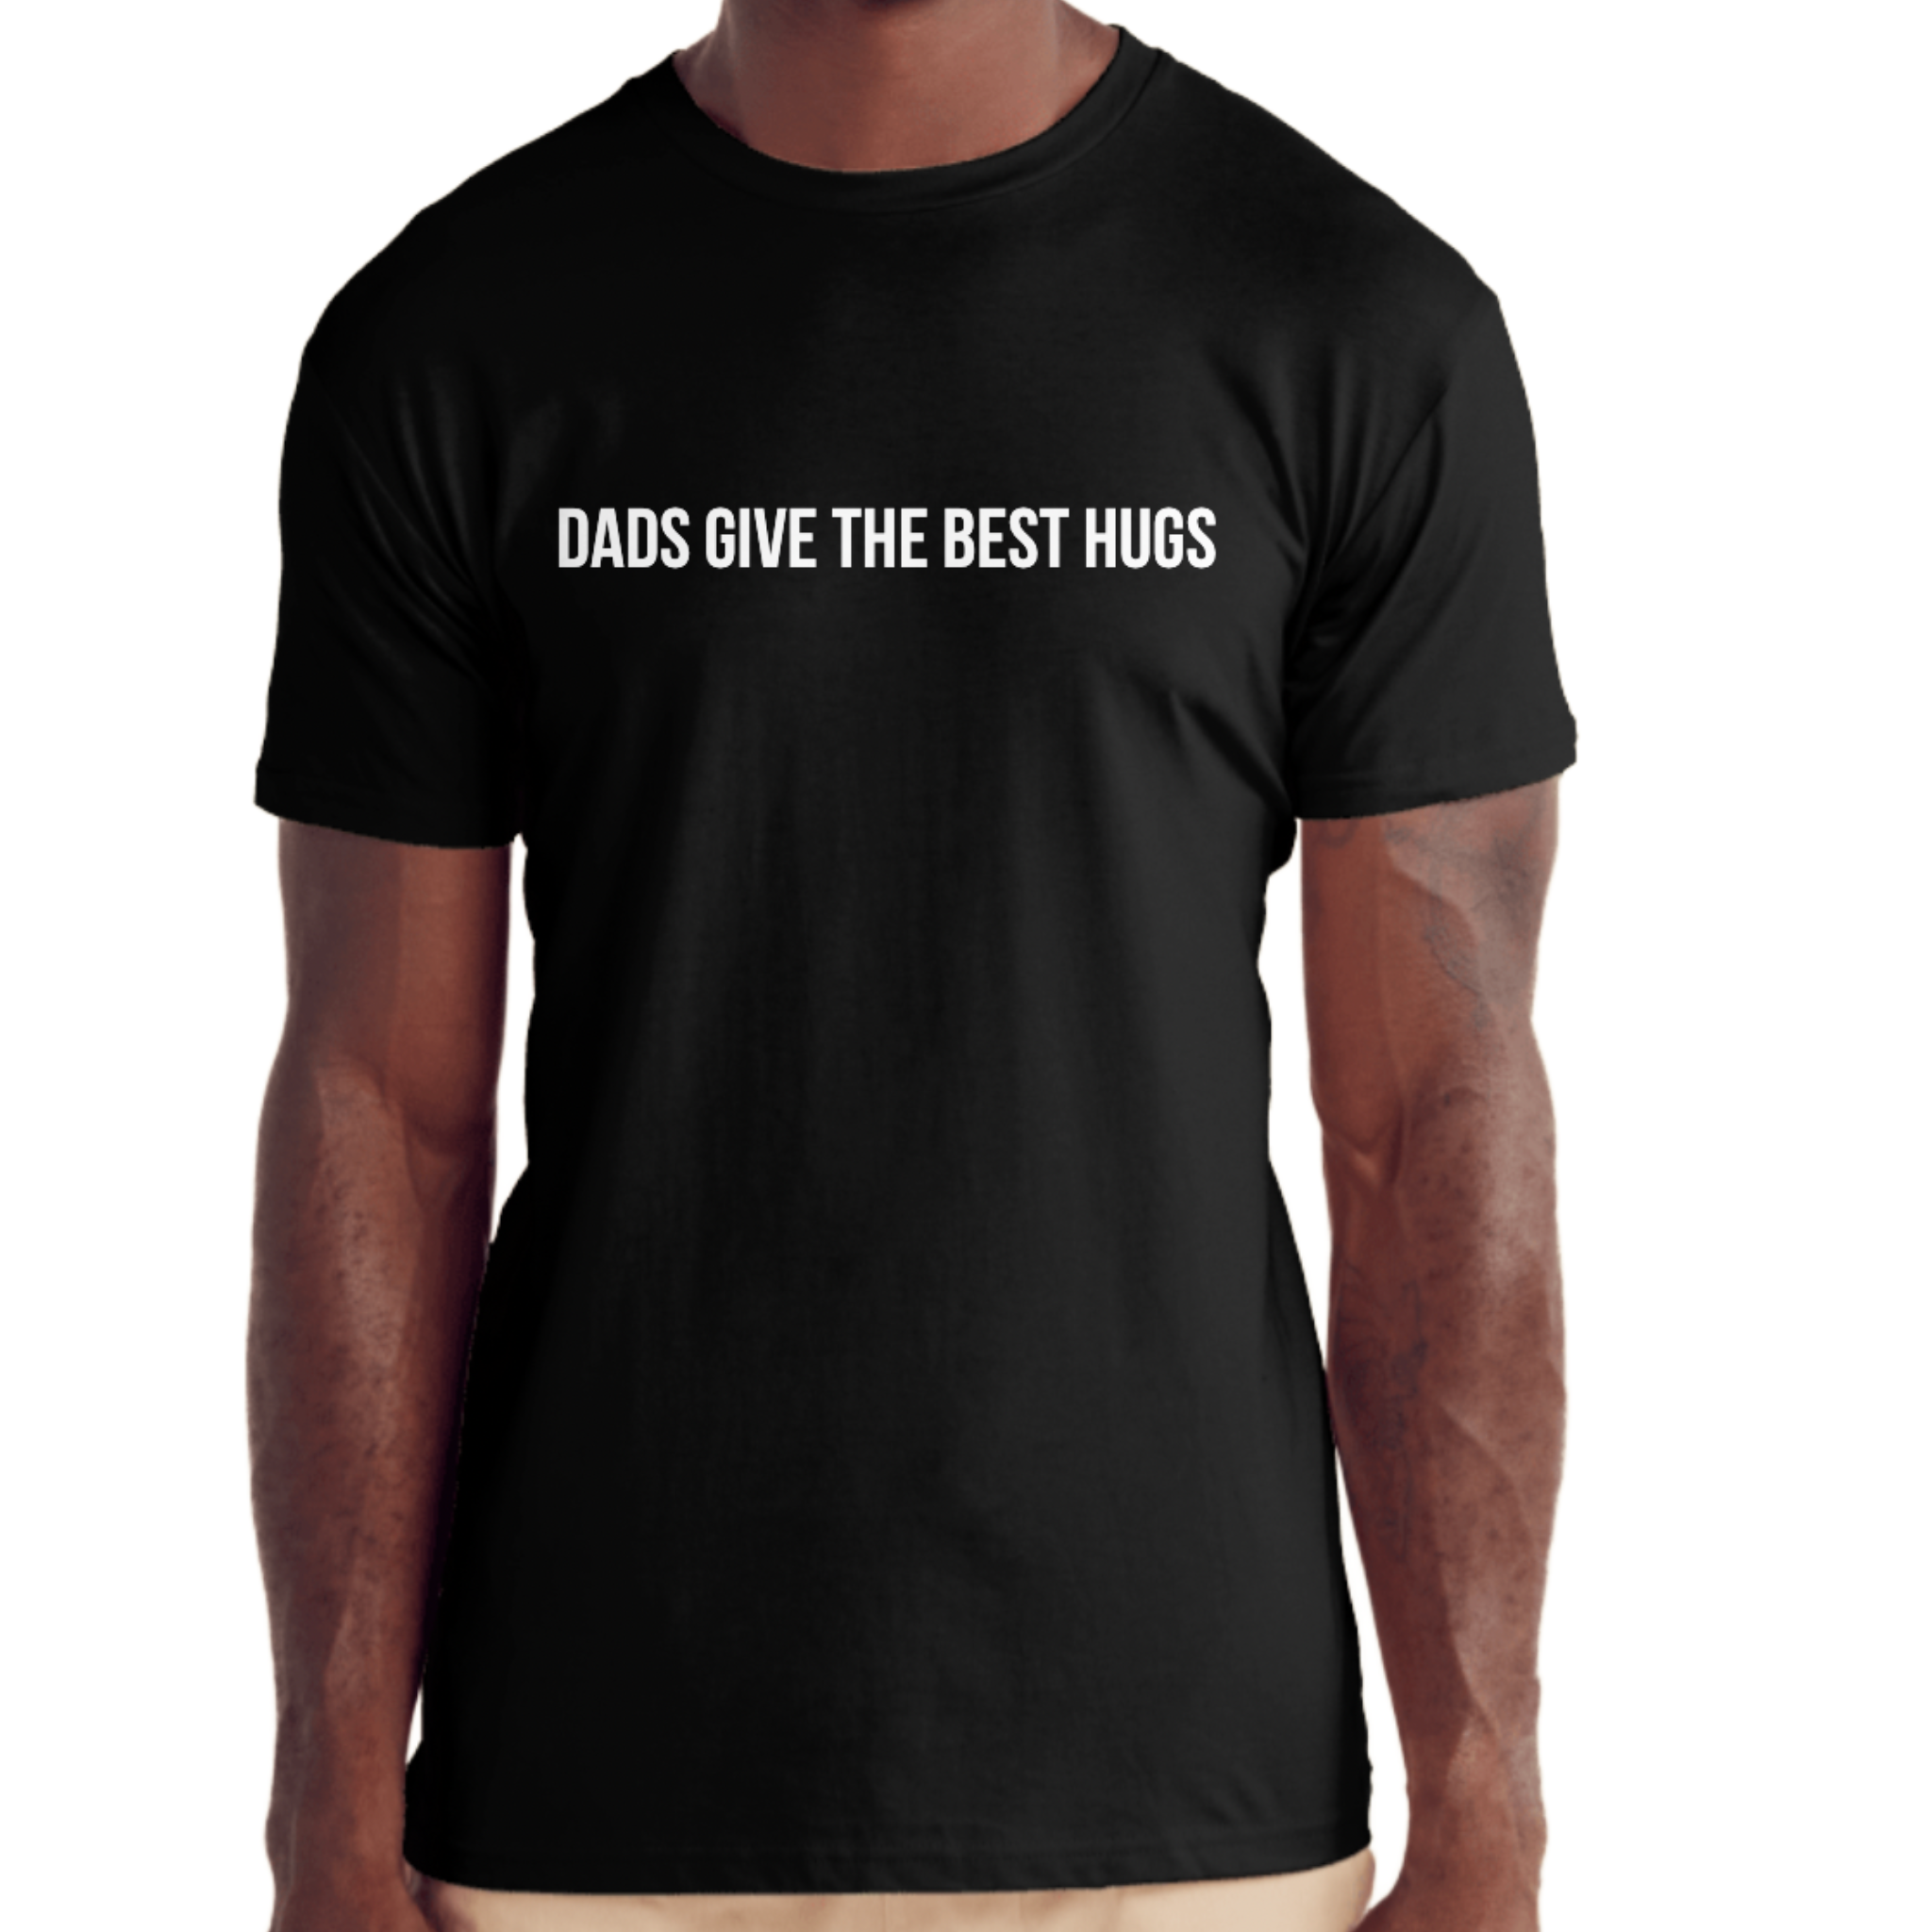 Dads Give The Best Hugs T-Shirt